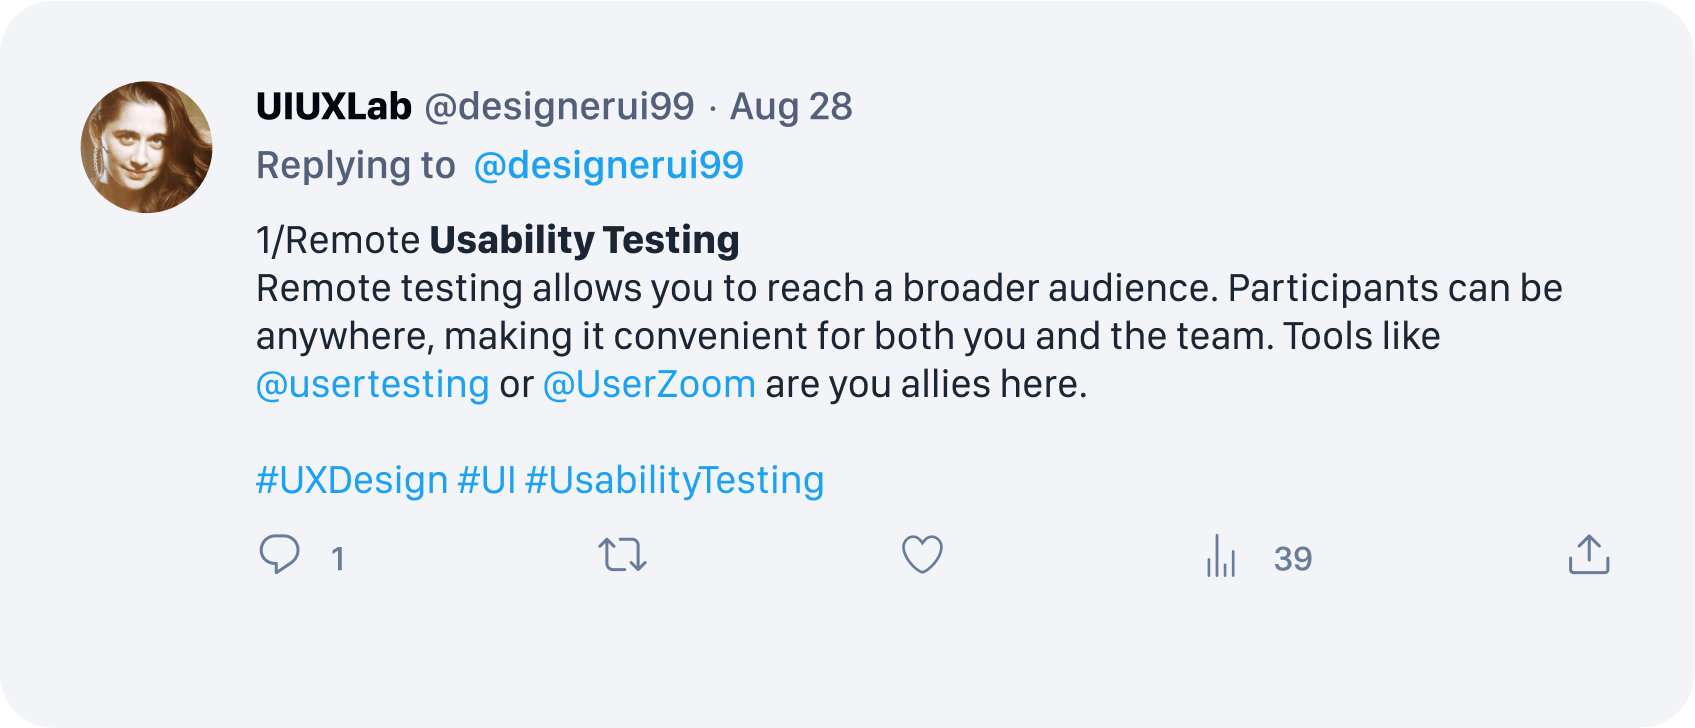 UIUXLab, @designerui99 - 1/Remote Usability Testing Remote testing allows you to reach a broader audience. Participants can be anywhere, making it convenient for both you and the team. Tools like @usertesting or @UserZoom are you allies here.  #UXDesign #UI #UsabilityTesting